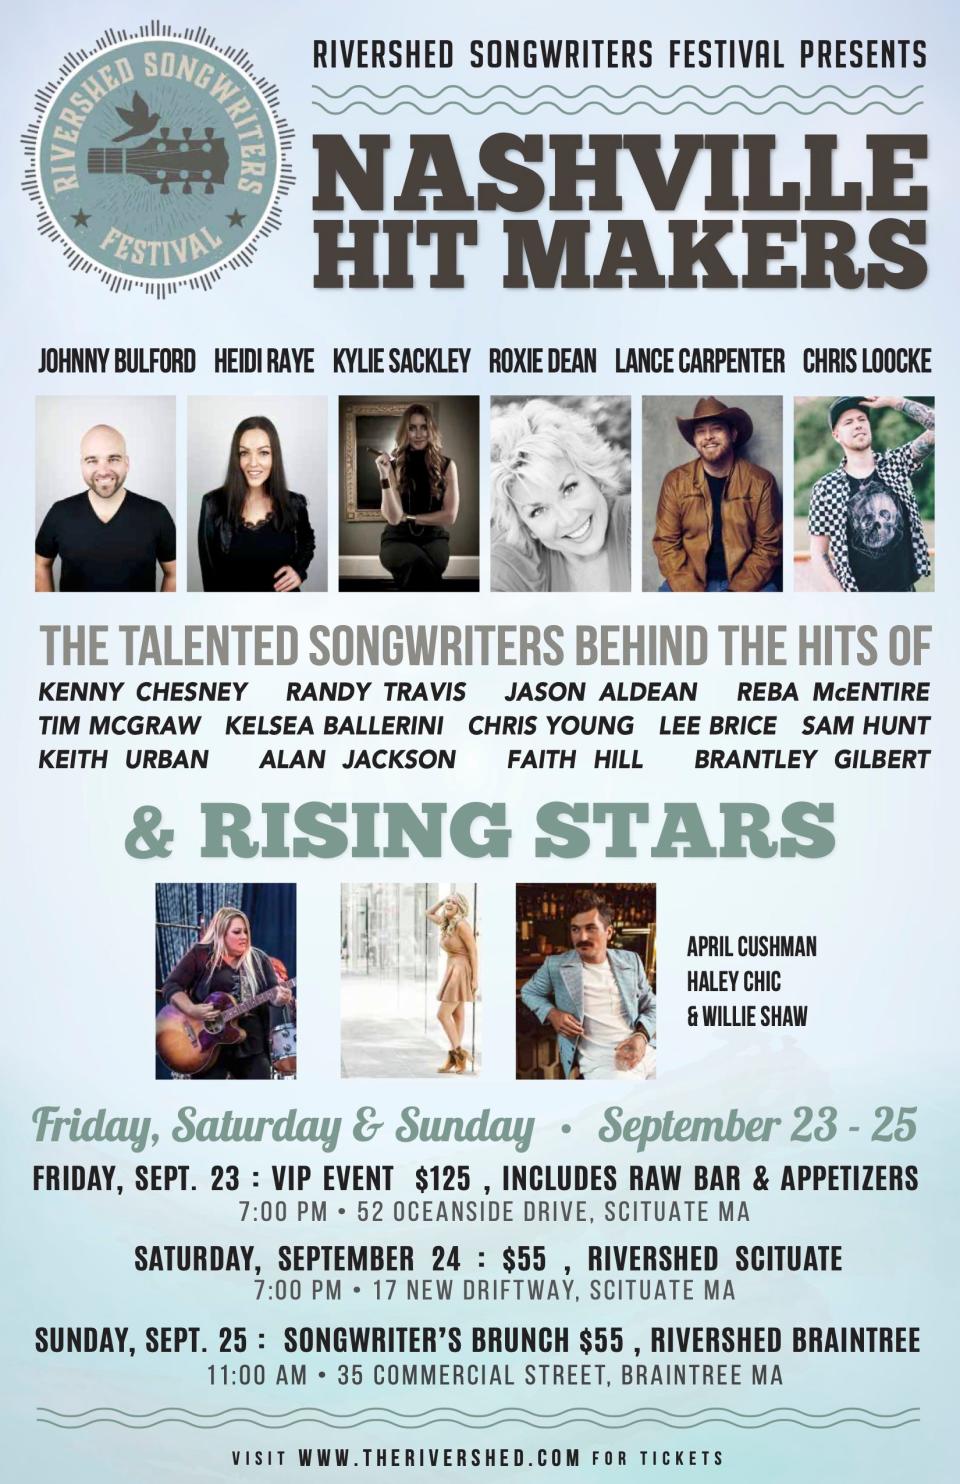 The Rivershed Songwriters Festival returns to Scituate and Braintree on the weekend of Sept. 23.